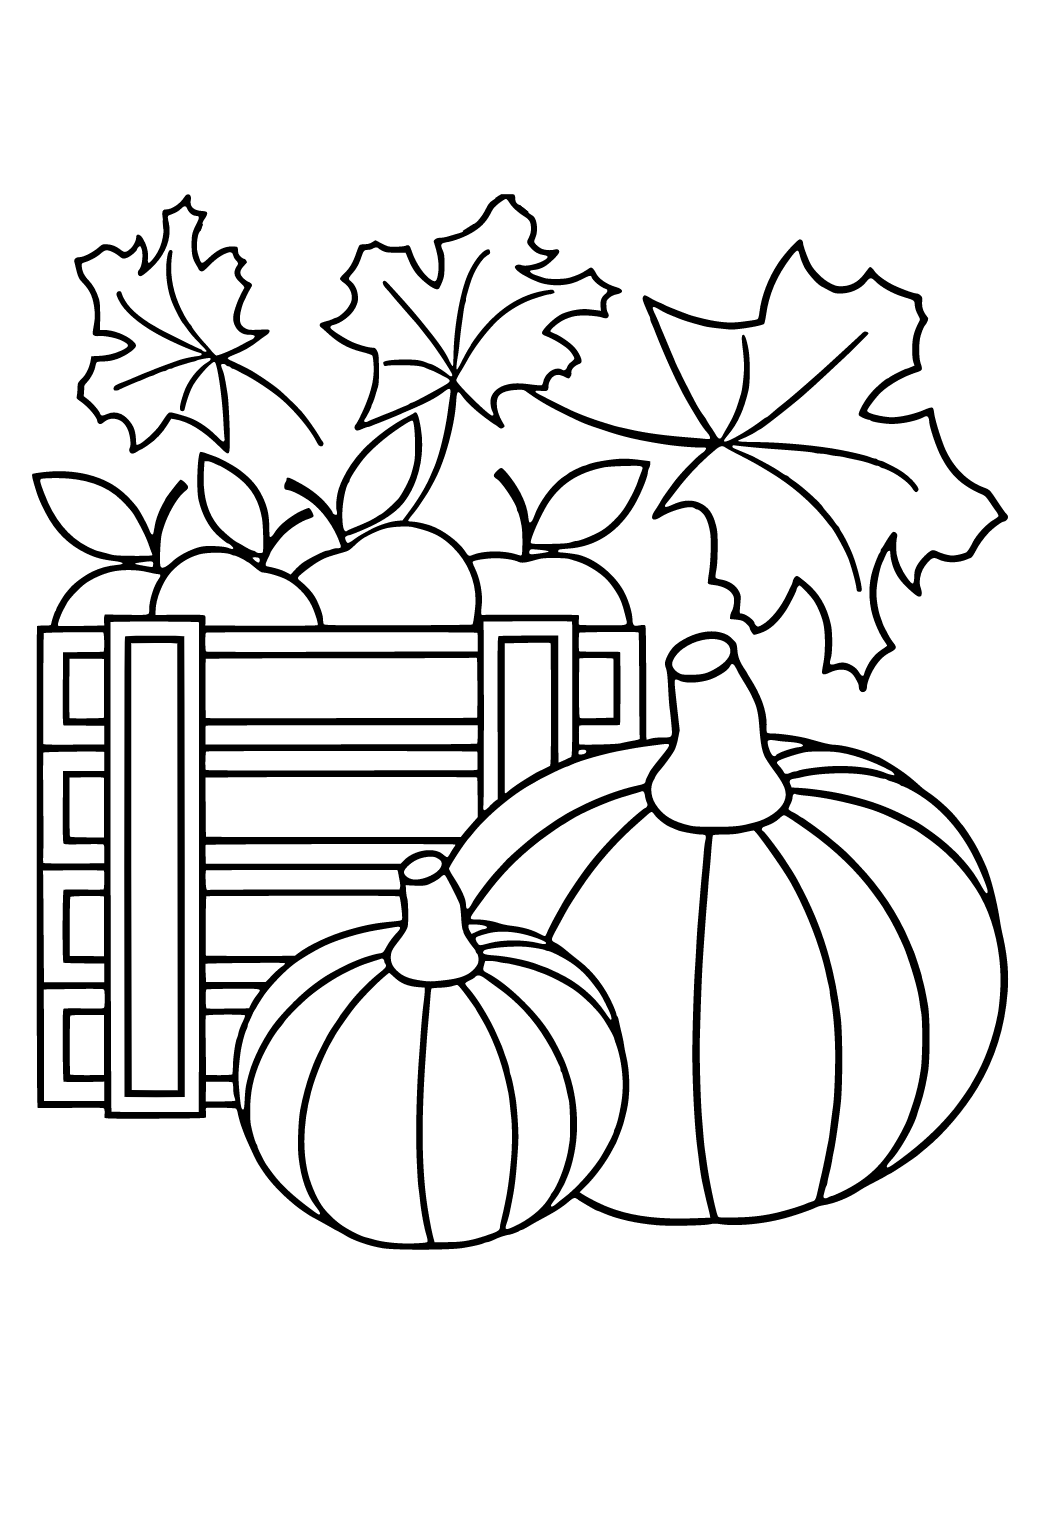 Free printable thanksgiving pumpkin coloring page for adults and kids